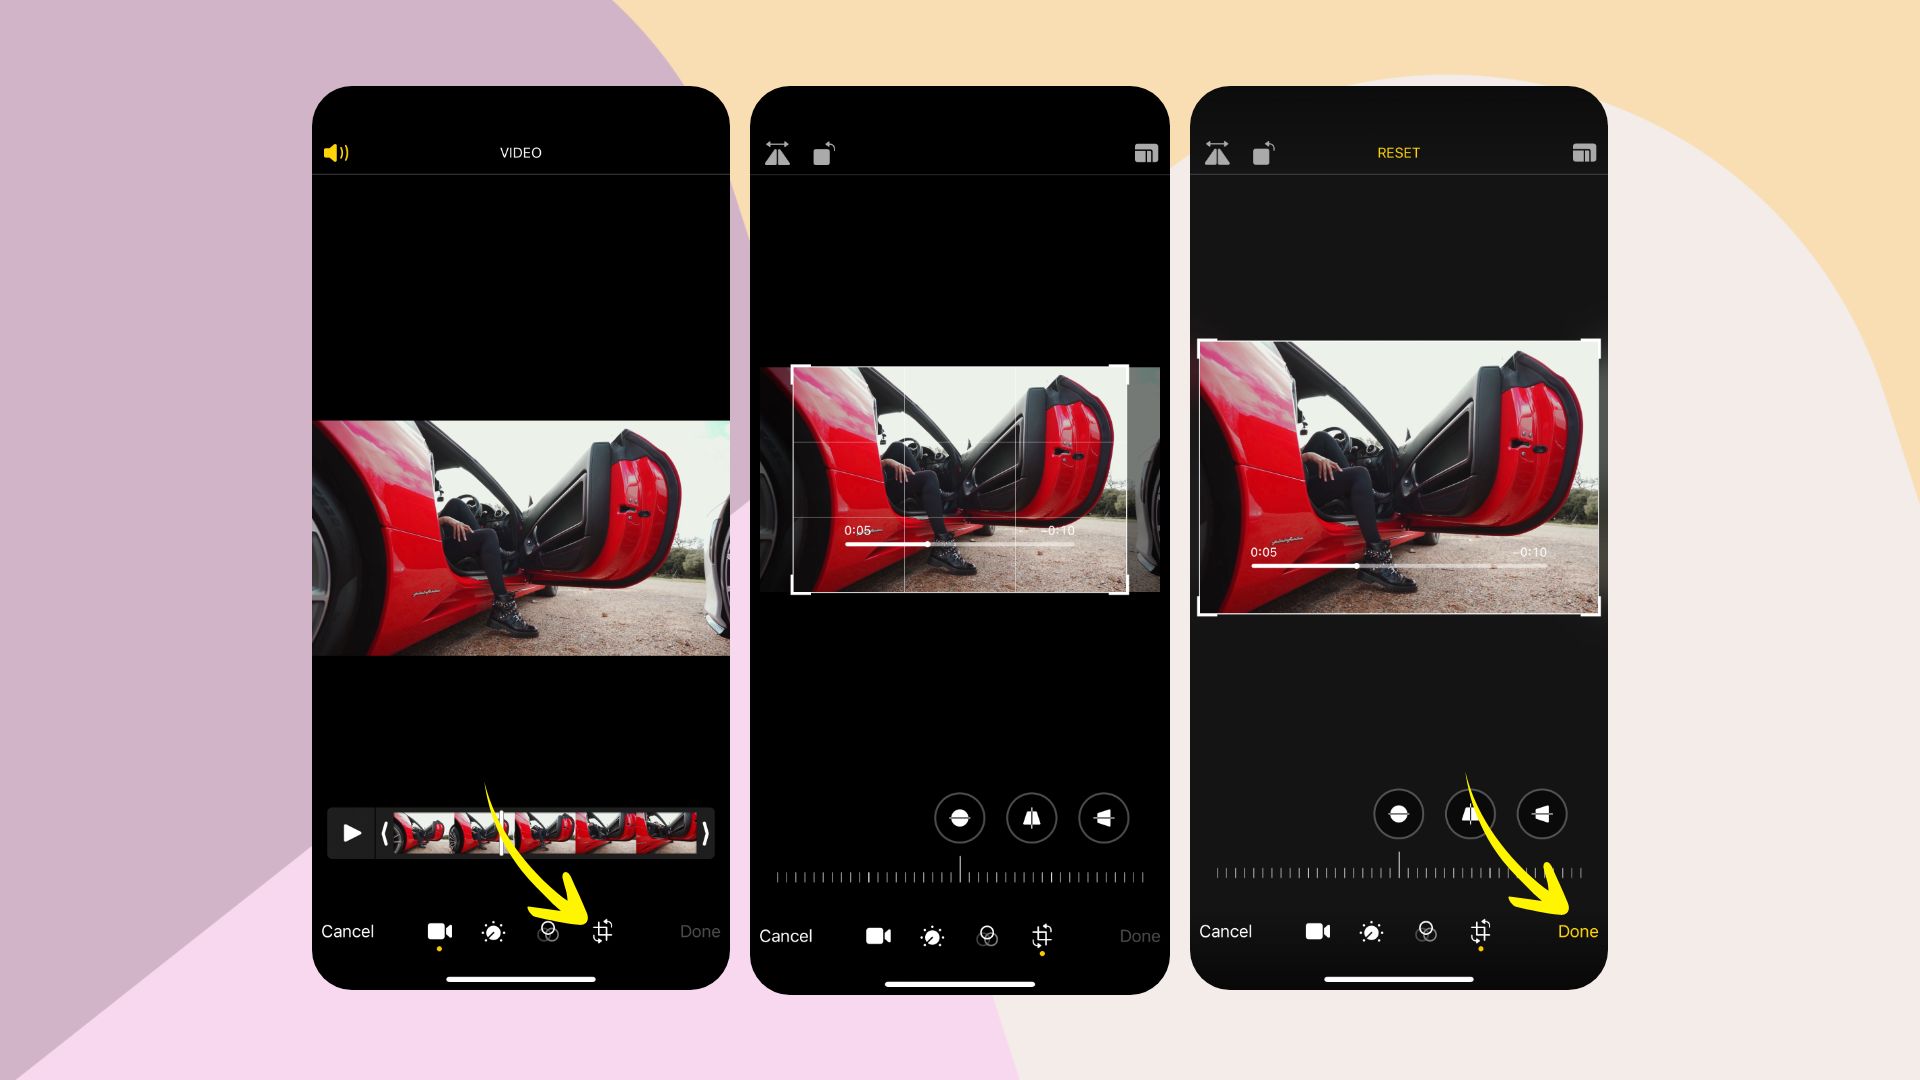 How to crop a video on iPhone using only the Photos app 2